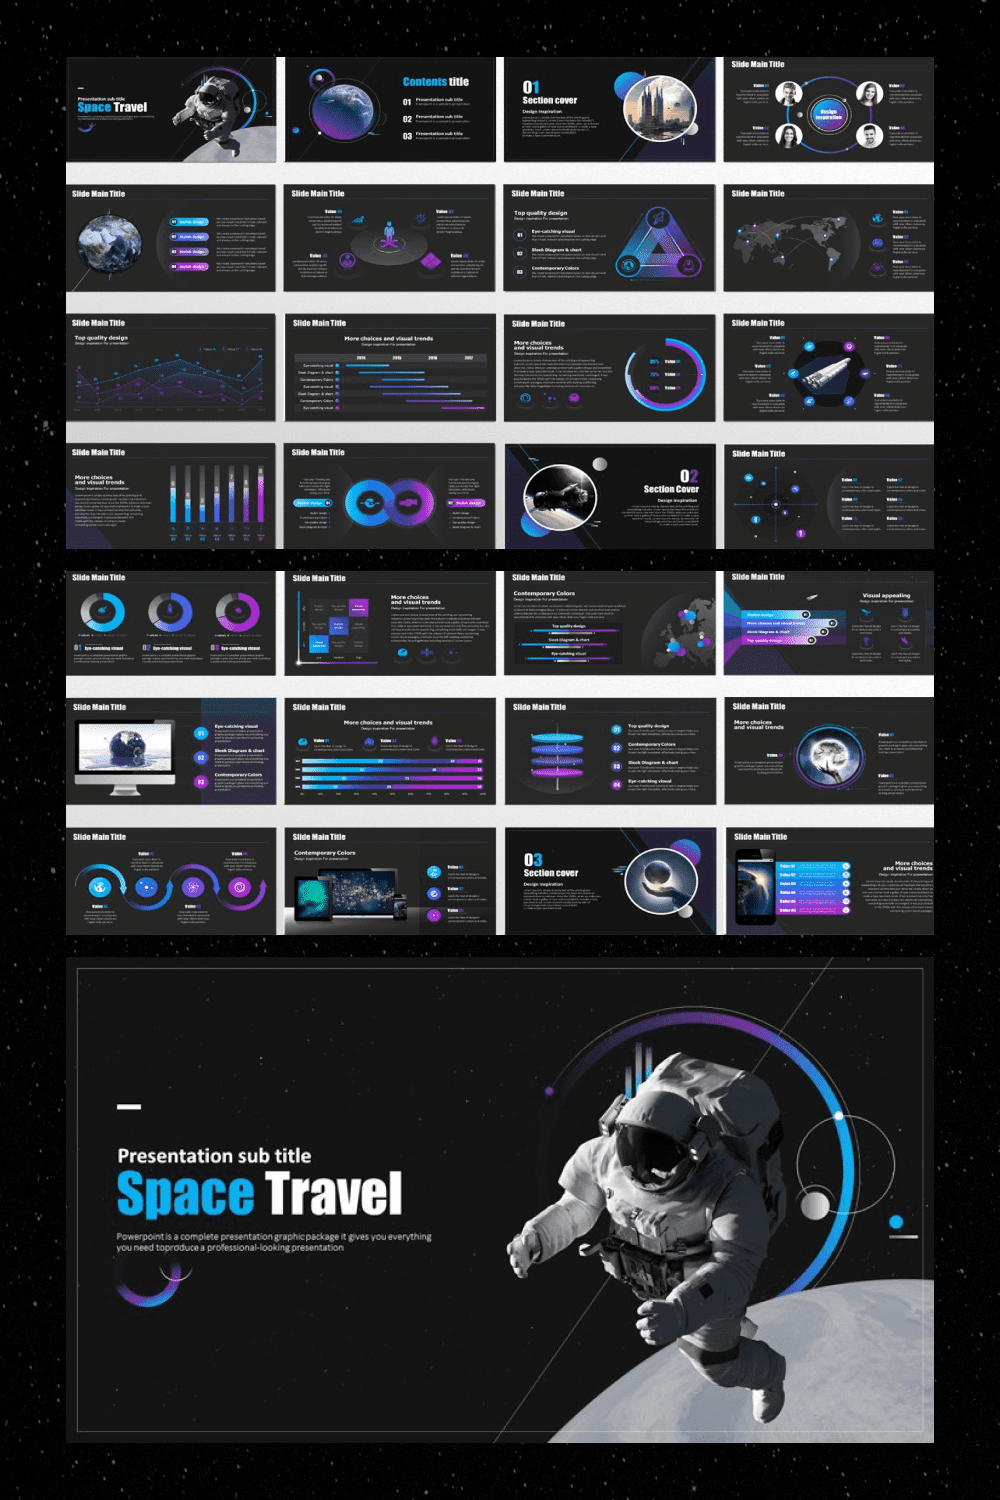 space travel powerpoint powerpoint image.